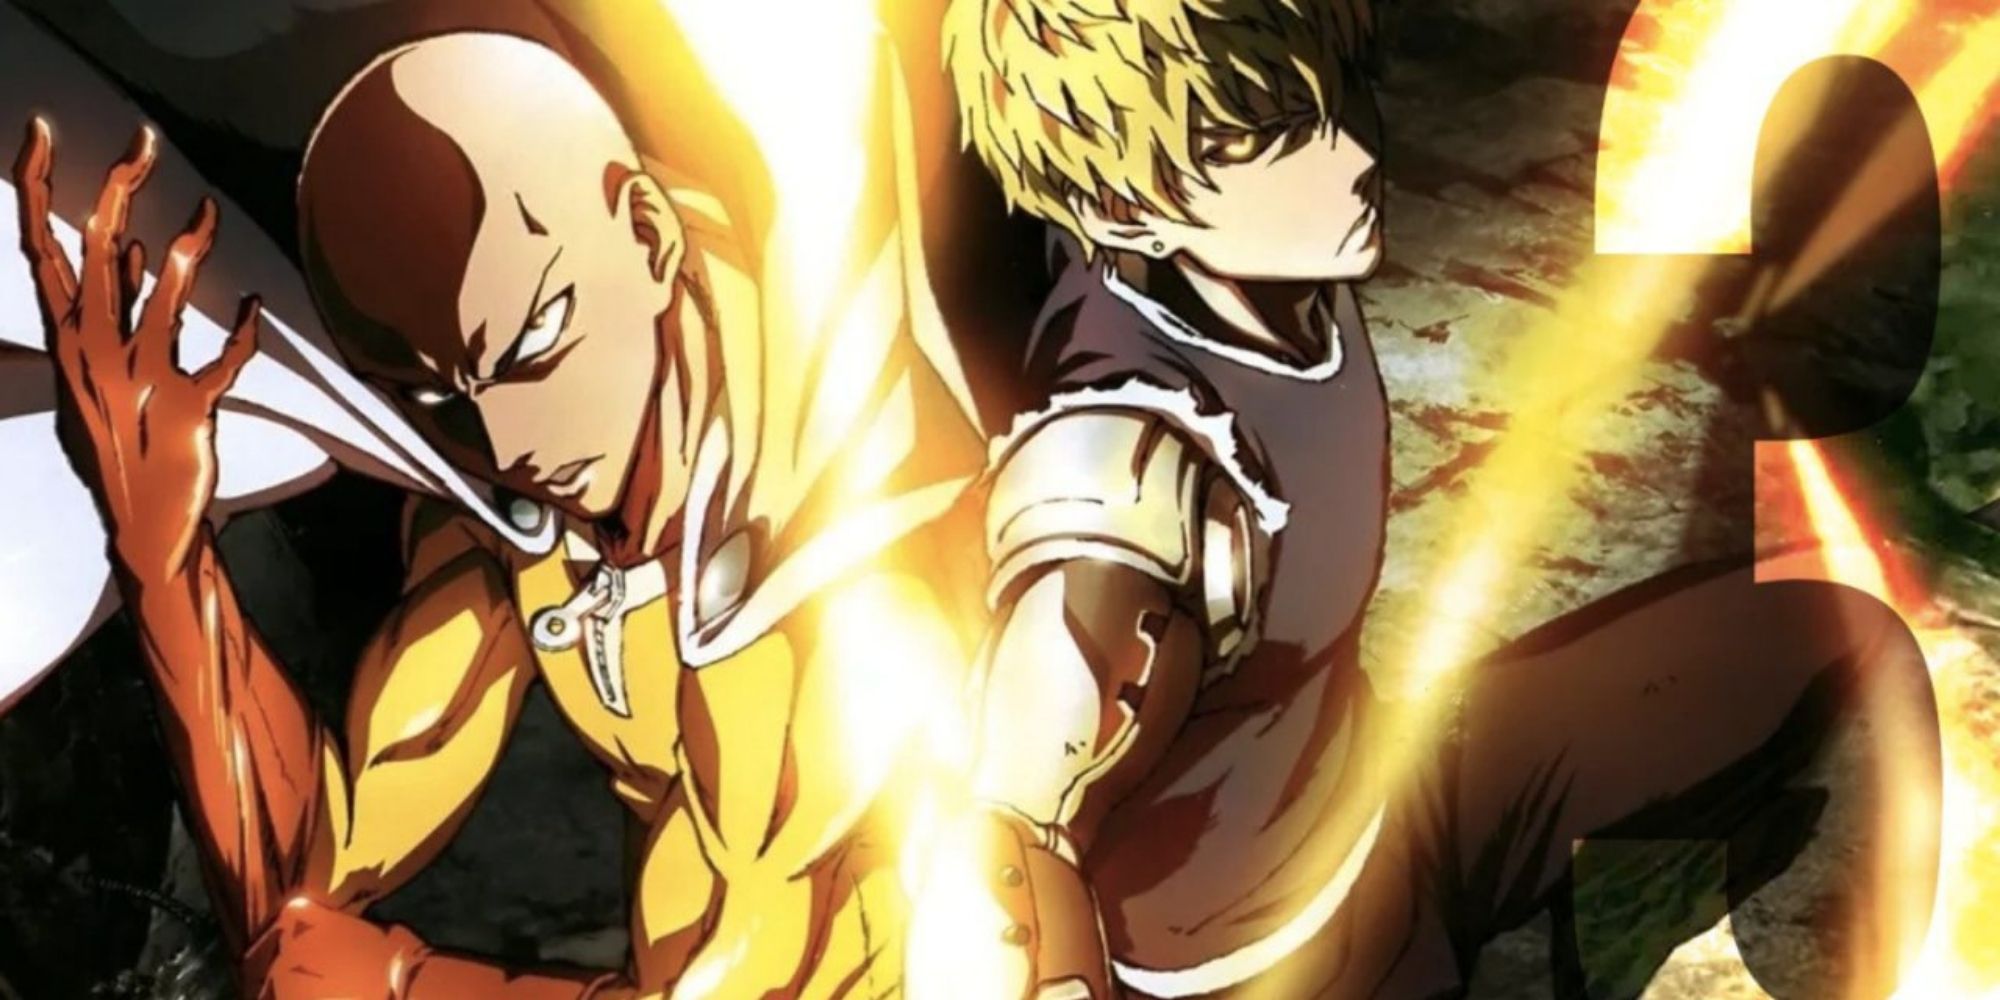 Saitama and Genos in One Punch Man